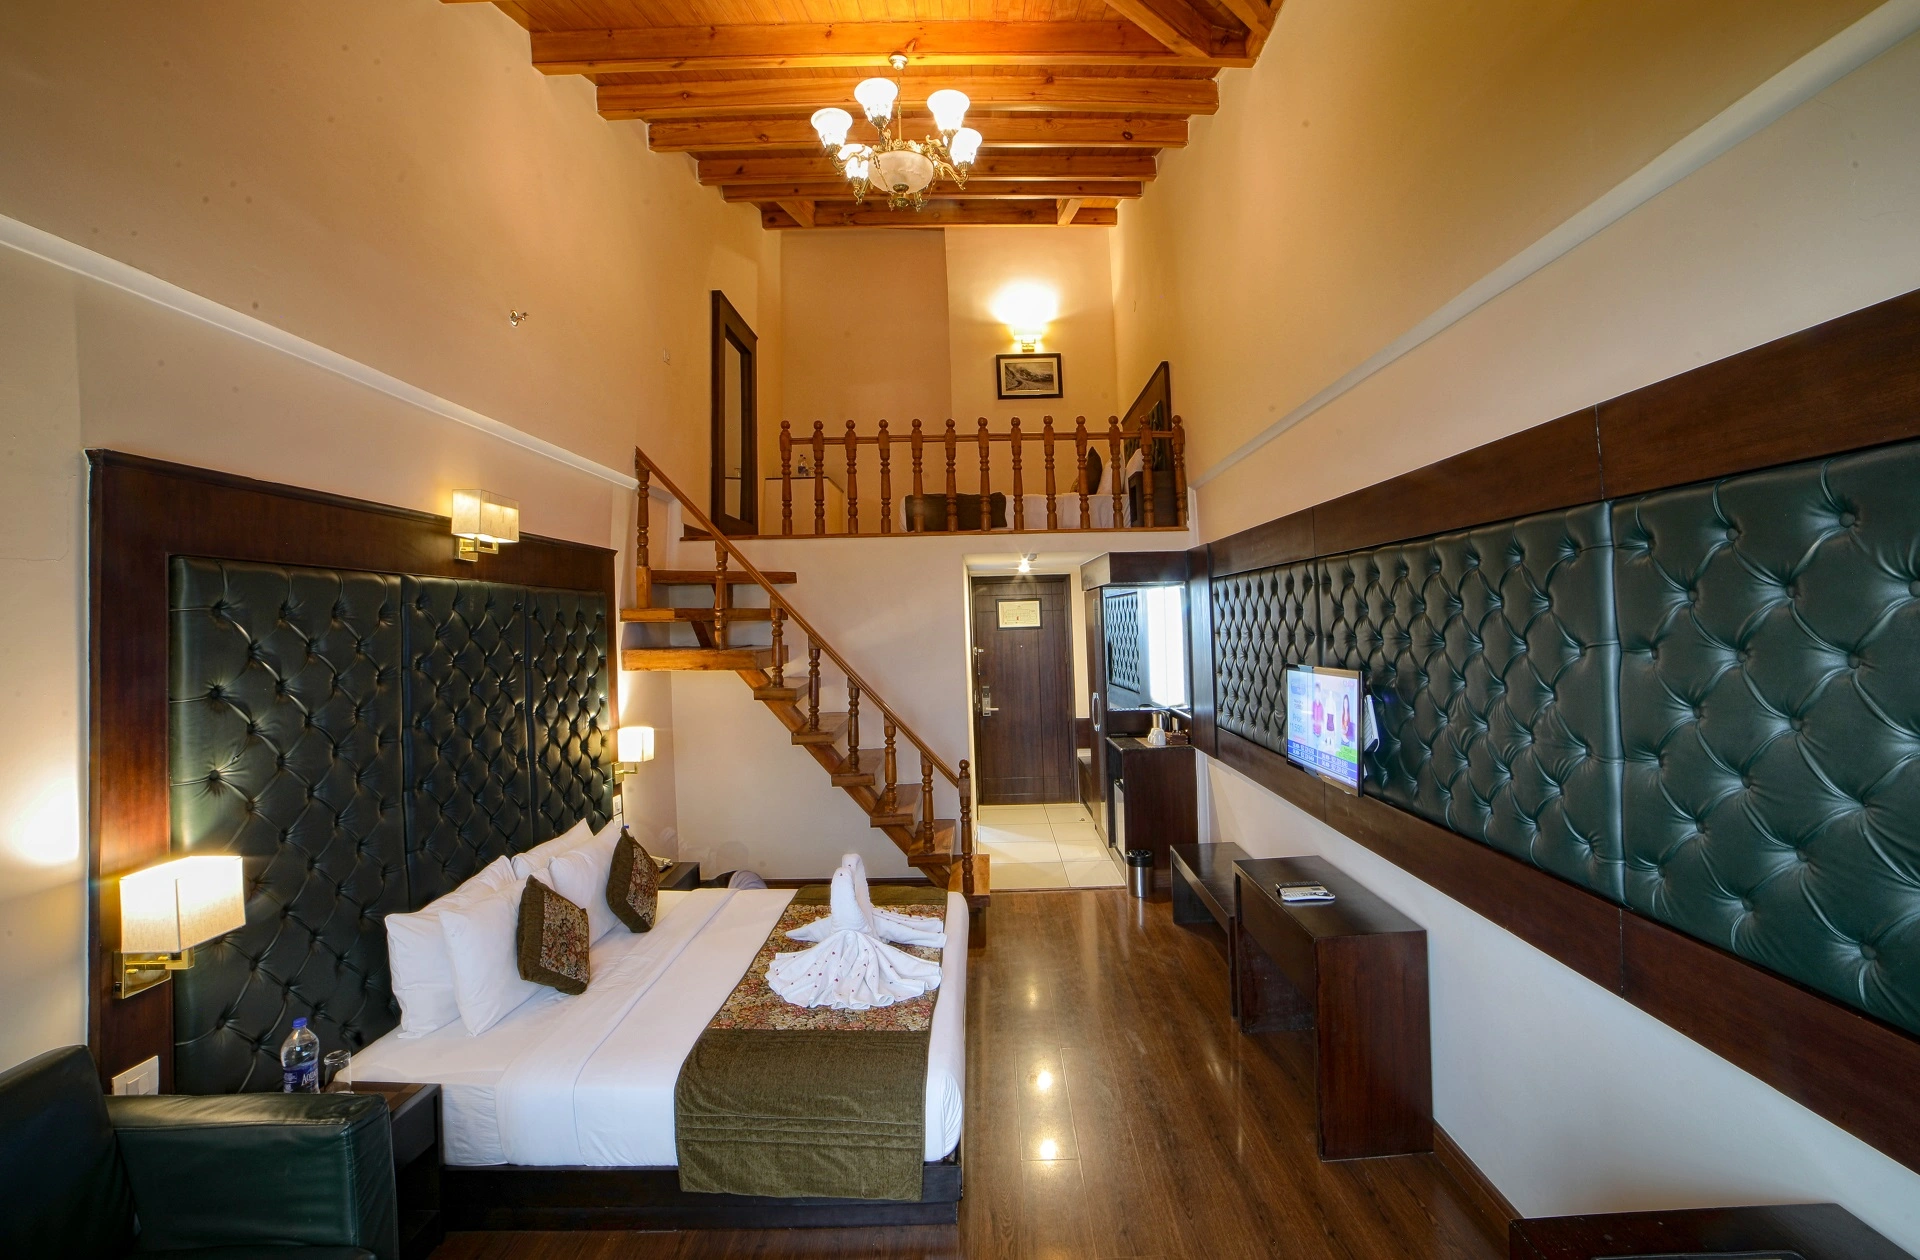 The duplex rooms are a perfect blend of luxury and comfort.